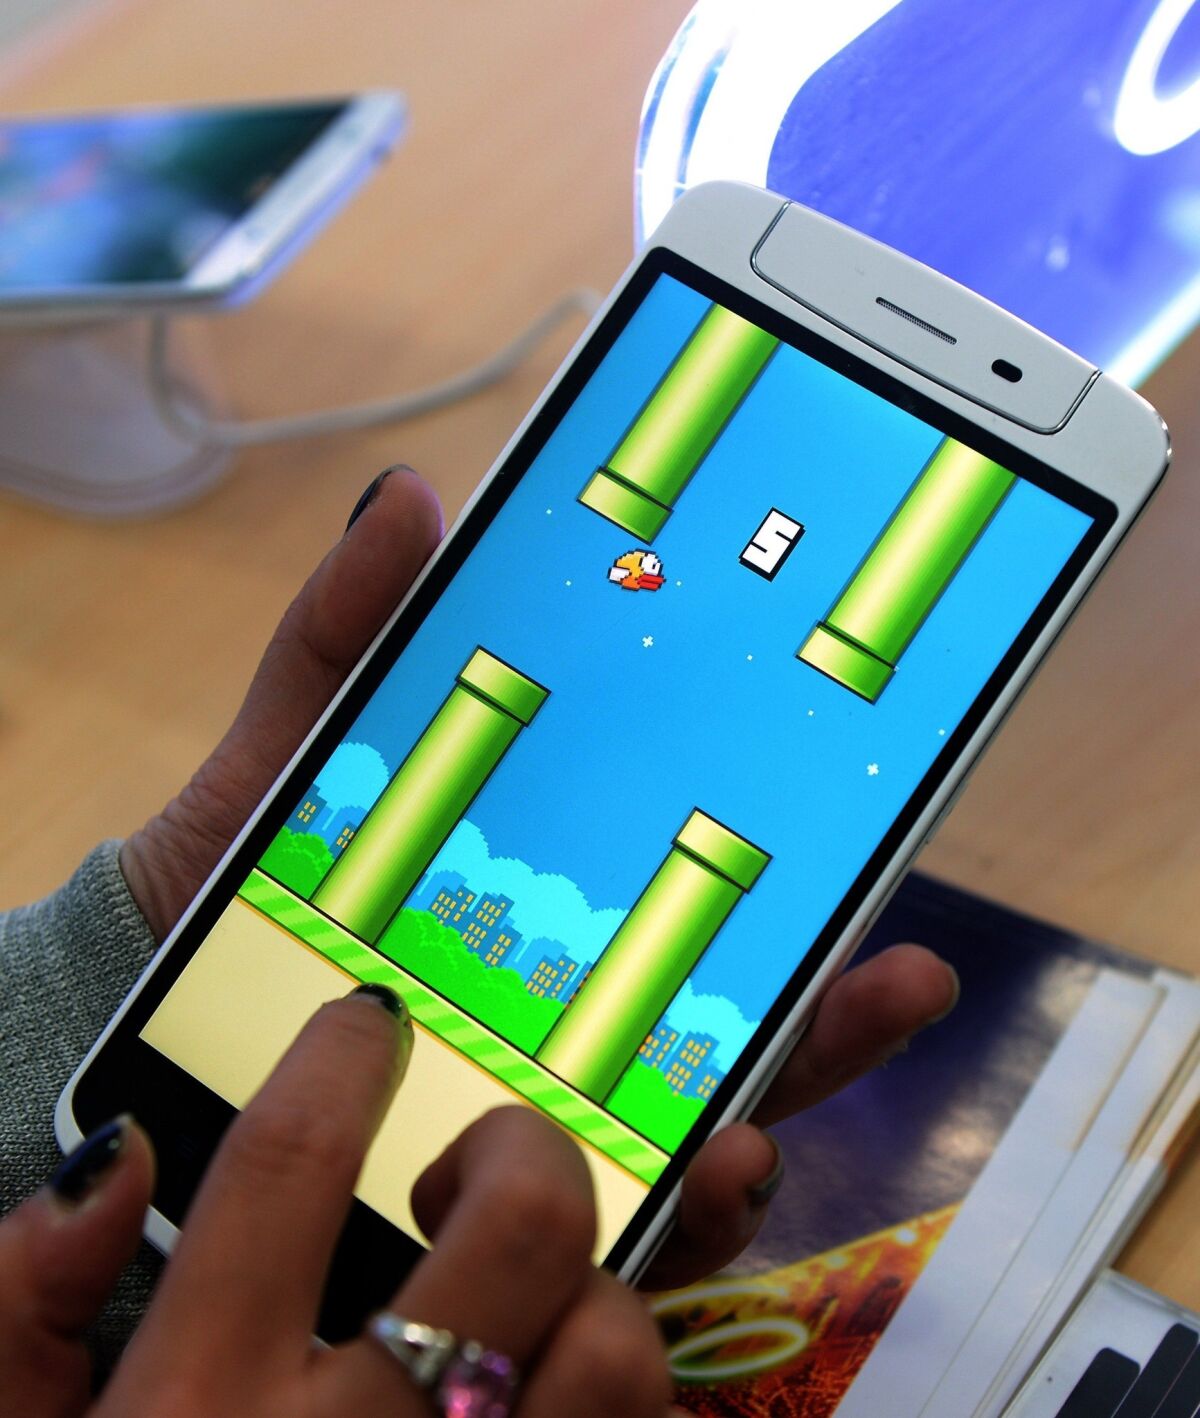 Since Flappy Bird, shown above, was removed from Google Play, fake versions of the game containing malware have sprung up around the Internet.